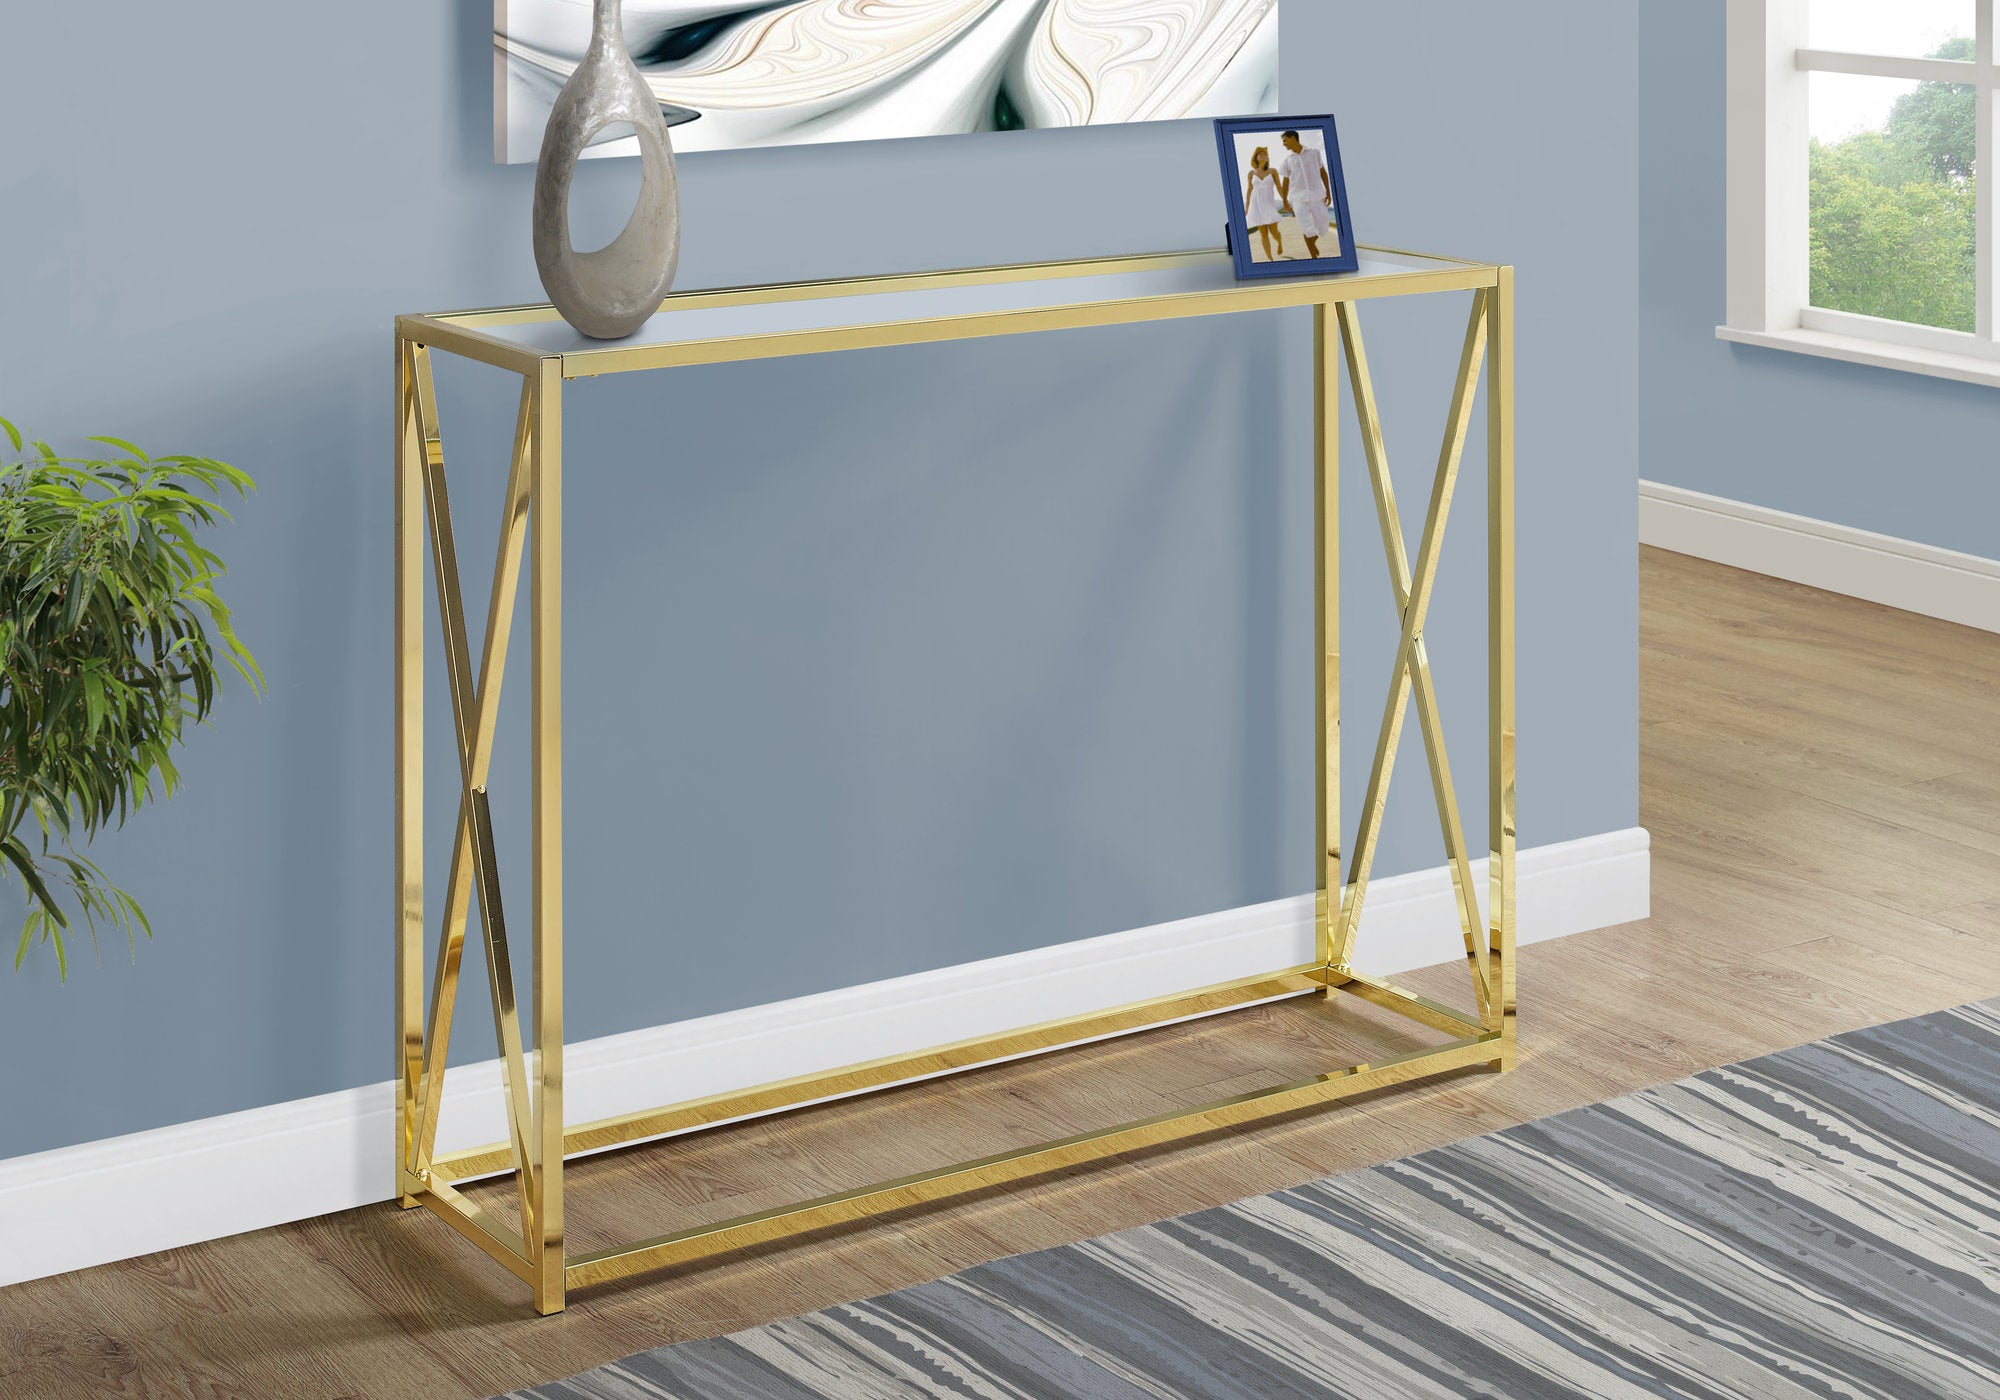 MN-673446    Accent Table, Console, Entryway, Narrow, Sofa, Living Room, Bedroom, Metal Frame, Tempered Glass, Gold, Clear, Contemporary, Modern